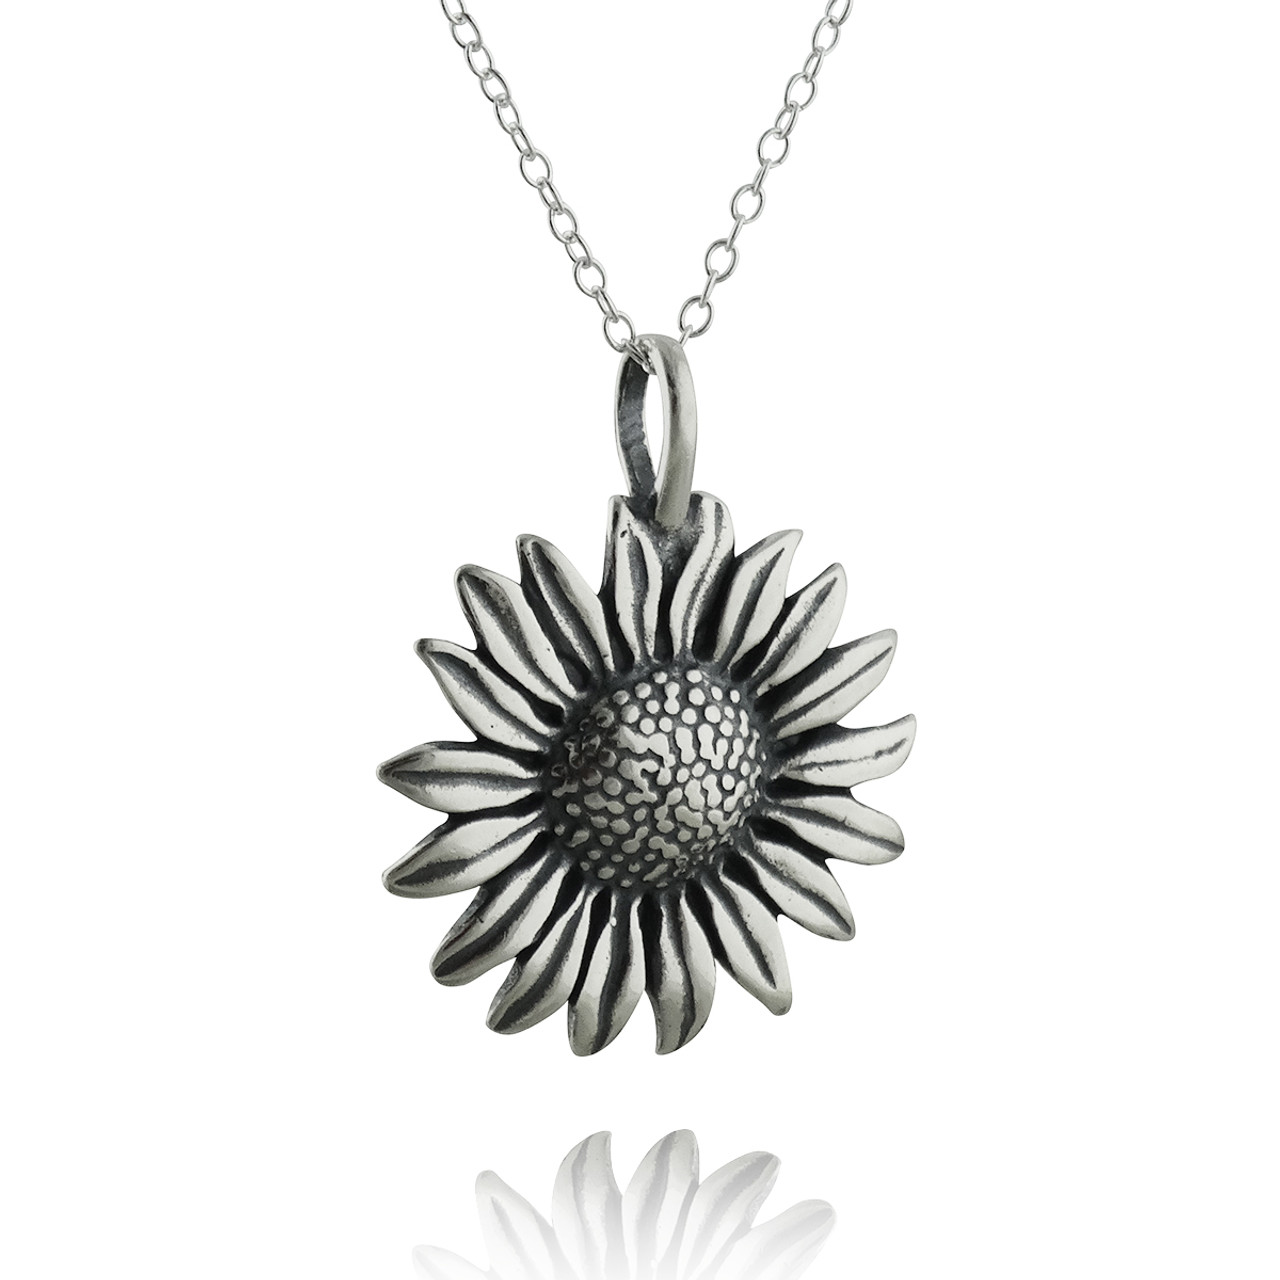 Exquisite Rose Gold/Silver Sunflower Necklace Sparkly Fashion Trendy Small  Gift | eBay